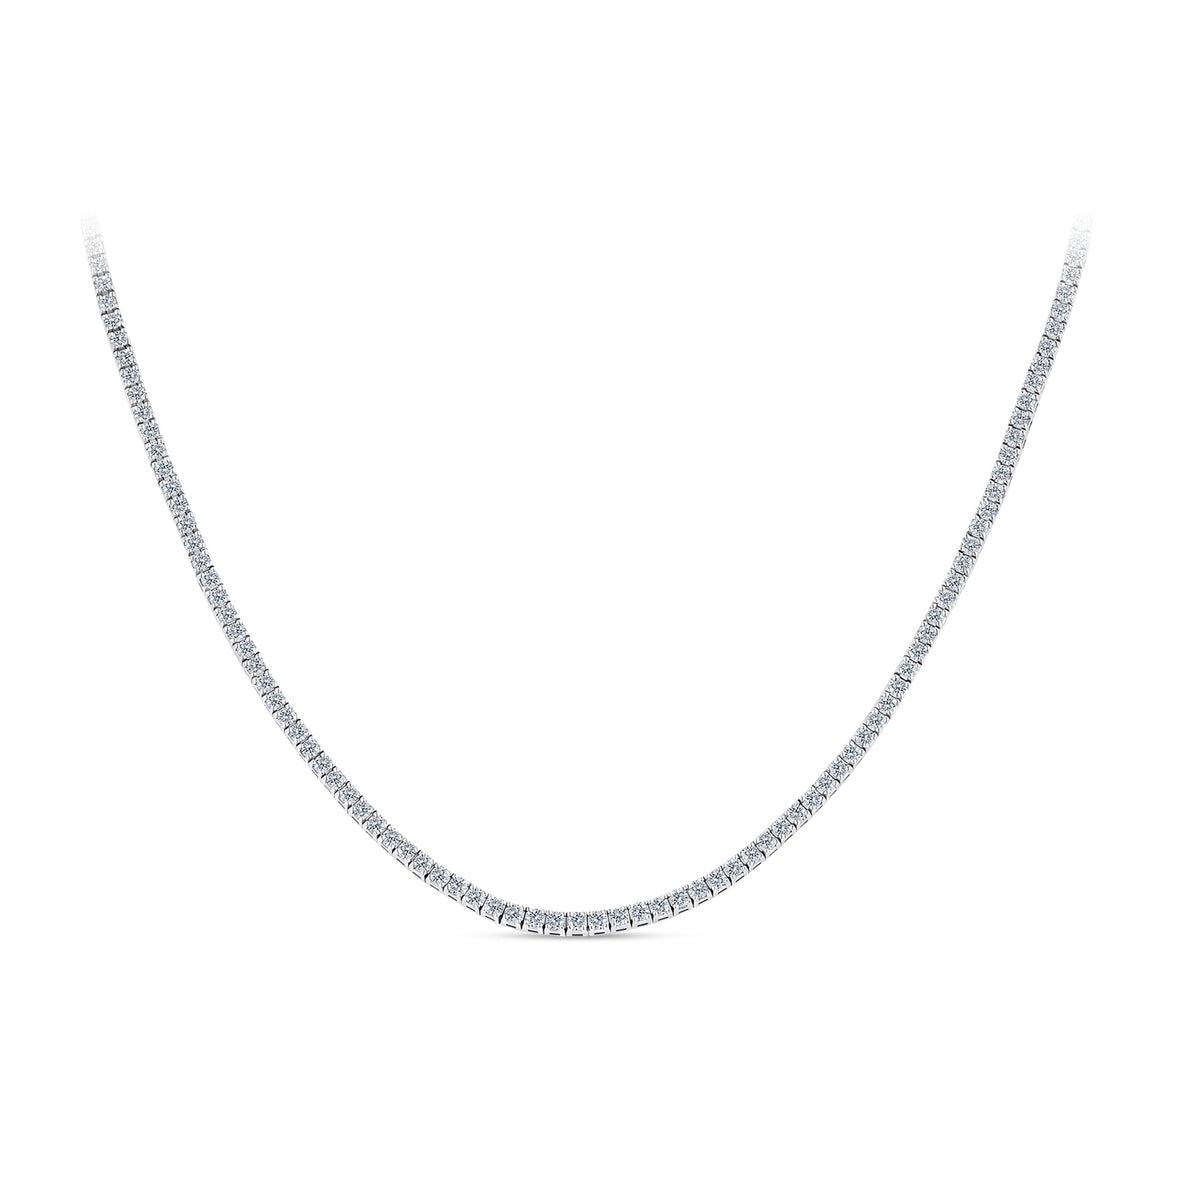 4.45ct TW Diamond Tennis Necklace in 18ct White Gold